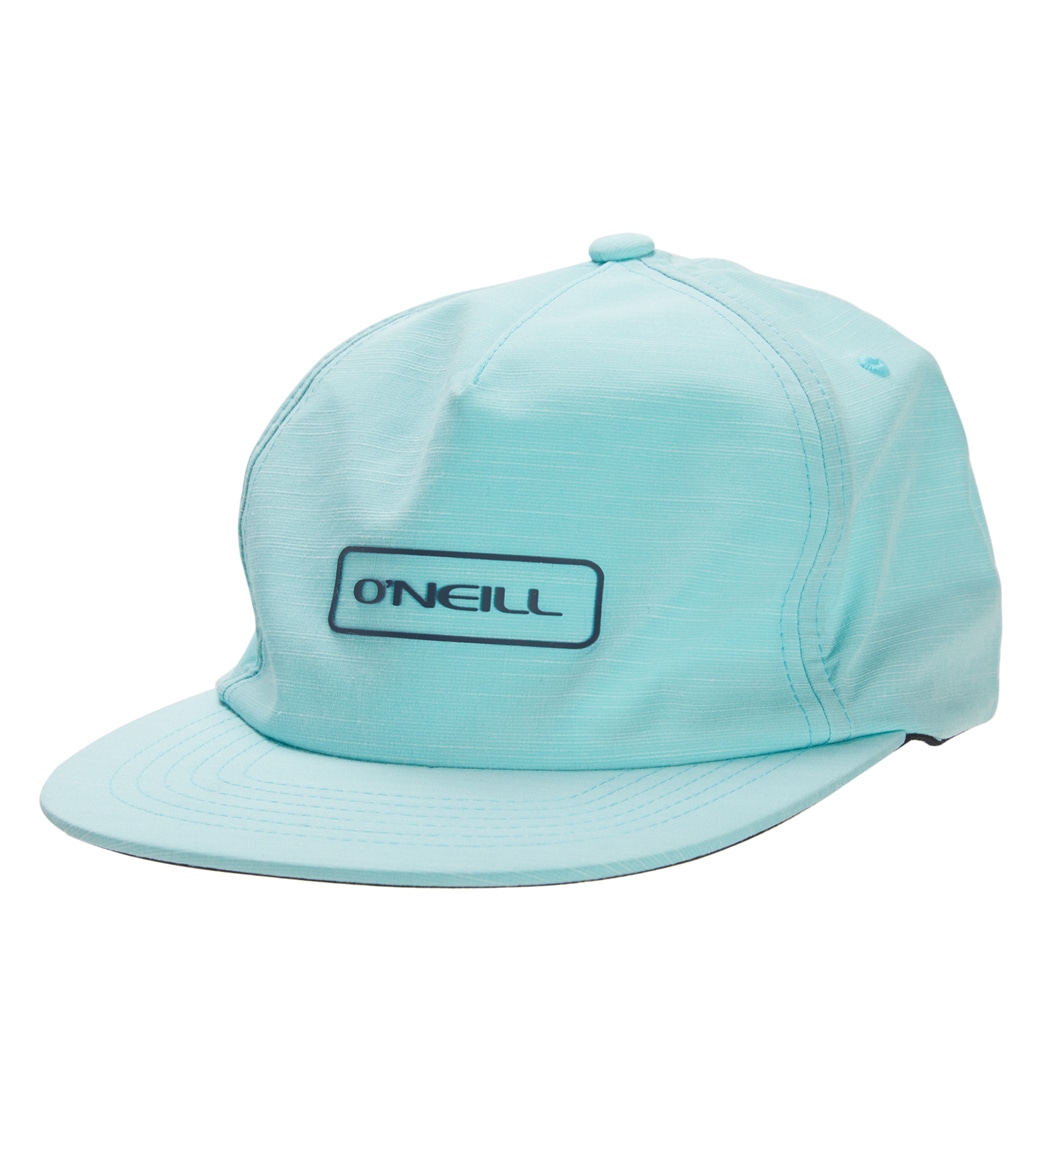 O'neill Men's Hybrid Snapback Hat - Turquoise Polyester - Swimoutlet.com